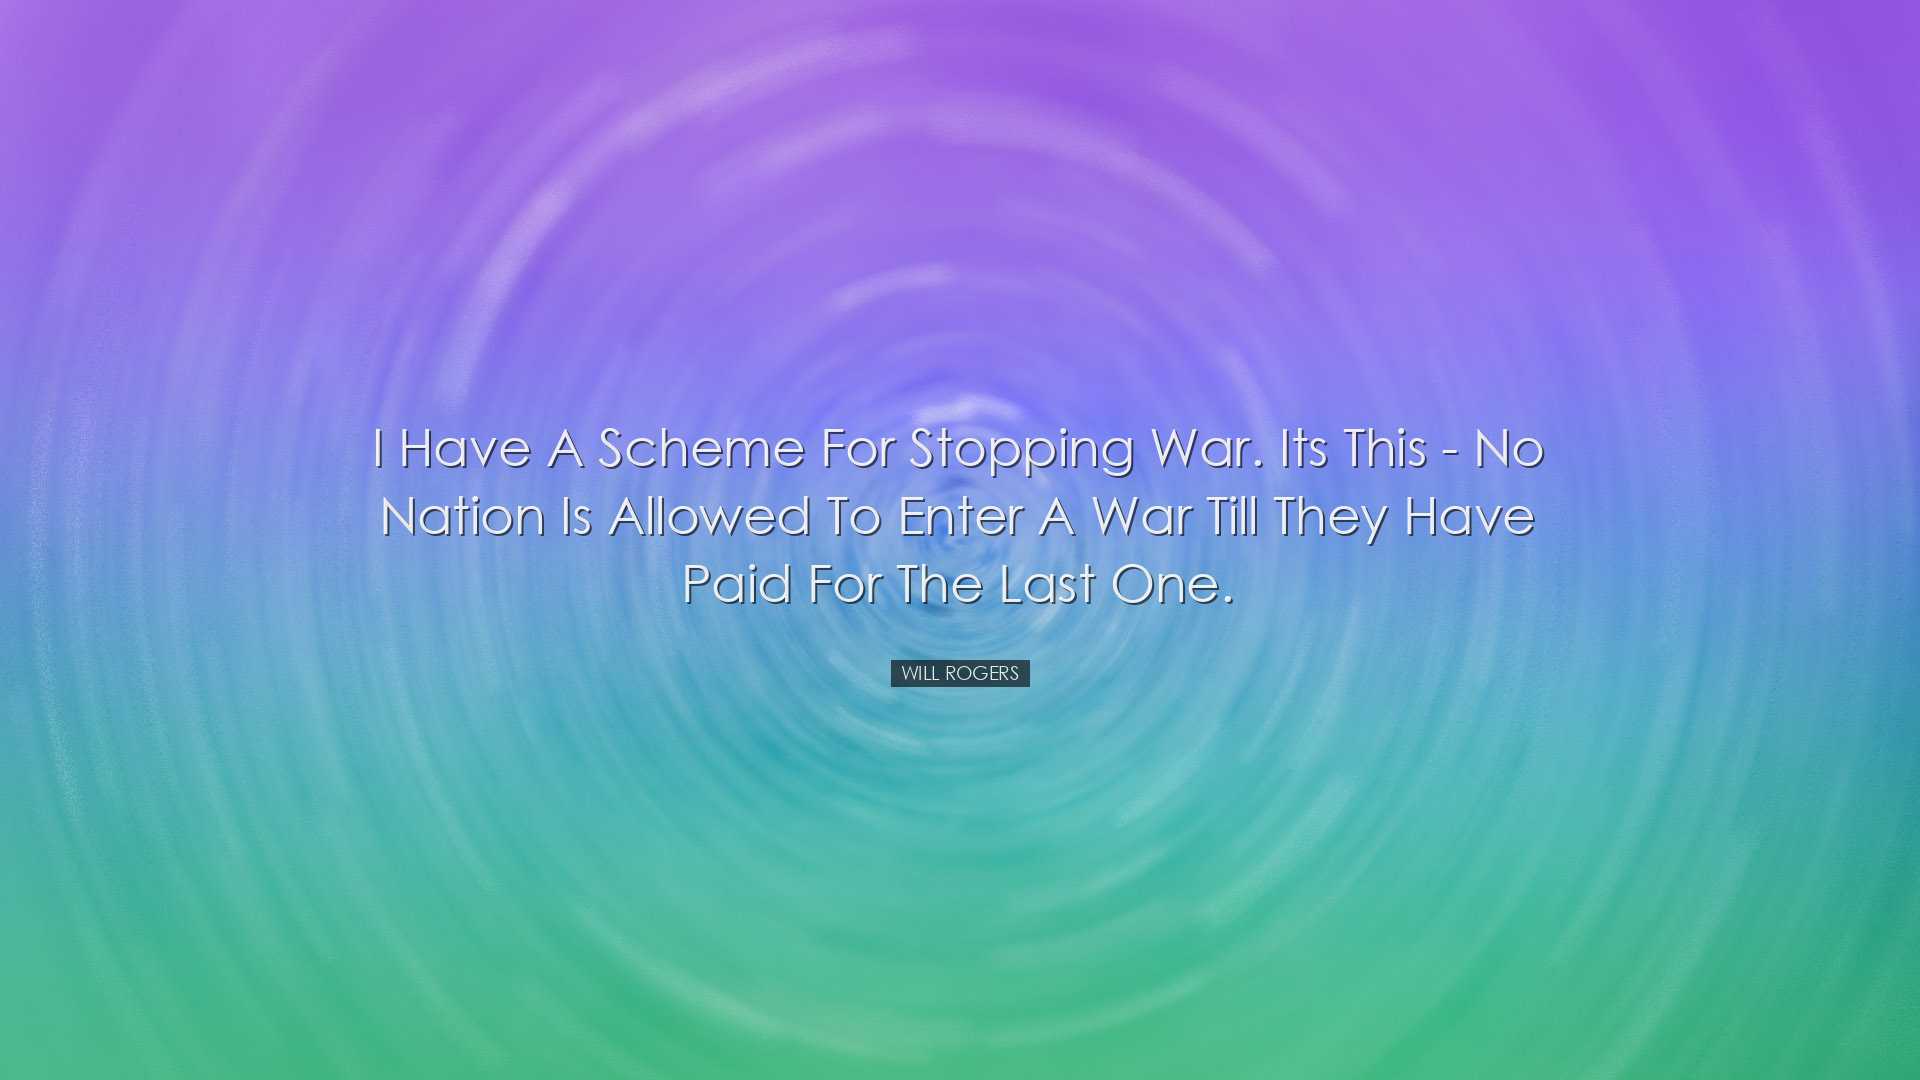 I have a scheme for stopping war. Its this - no nation is allowed